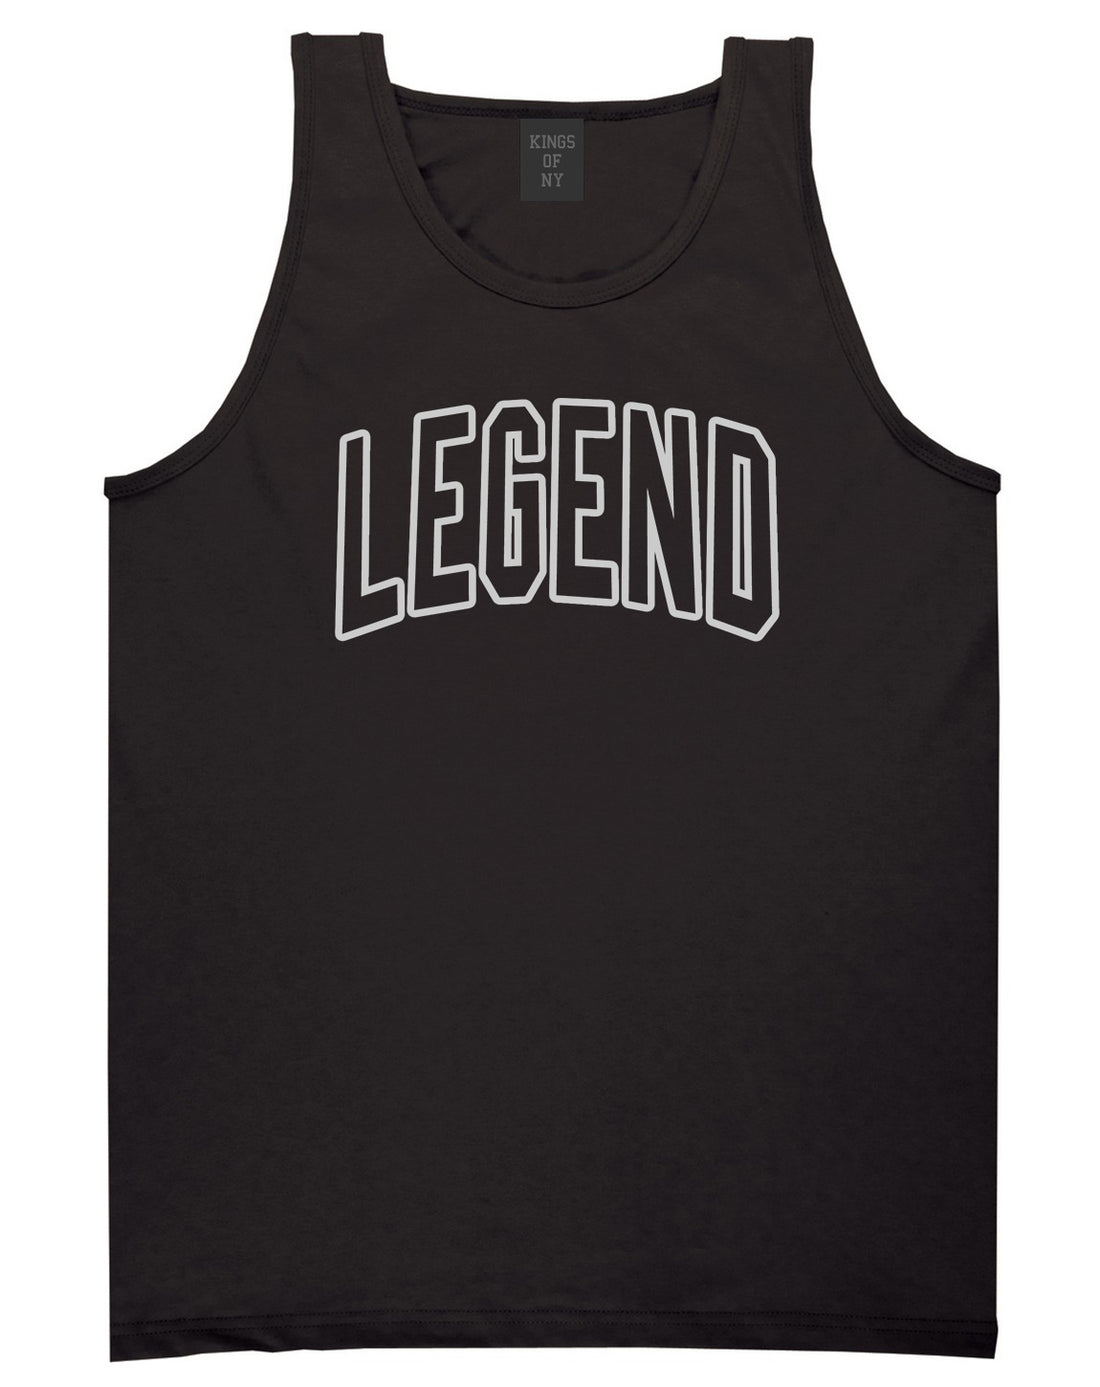 Legend Outline Mens Tank Top Shirt Black by Kings Of NY